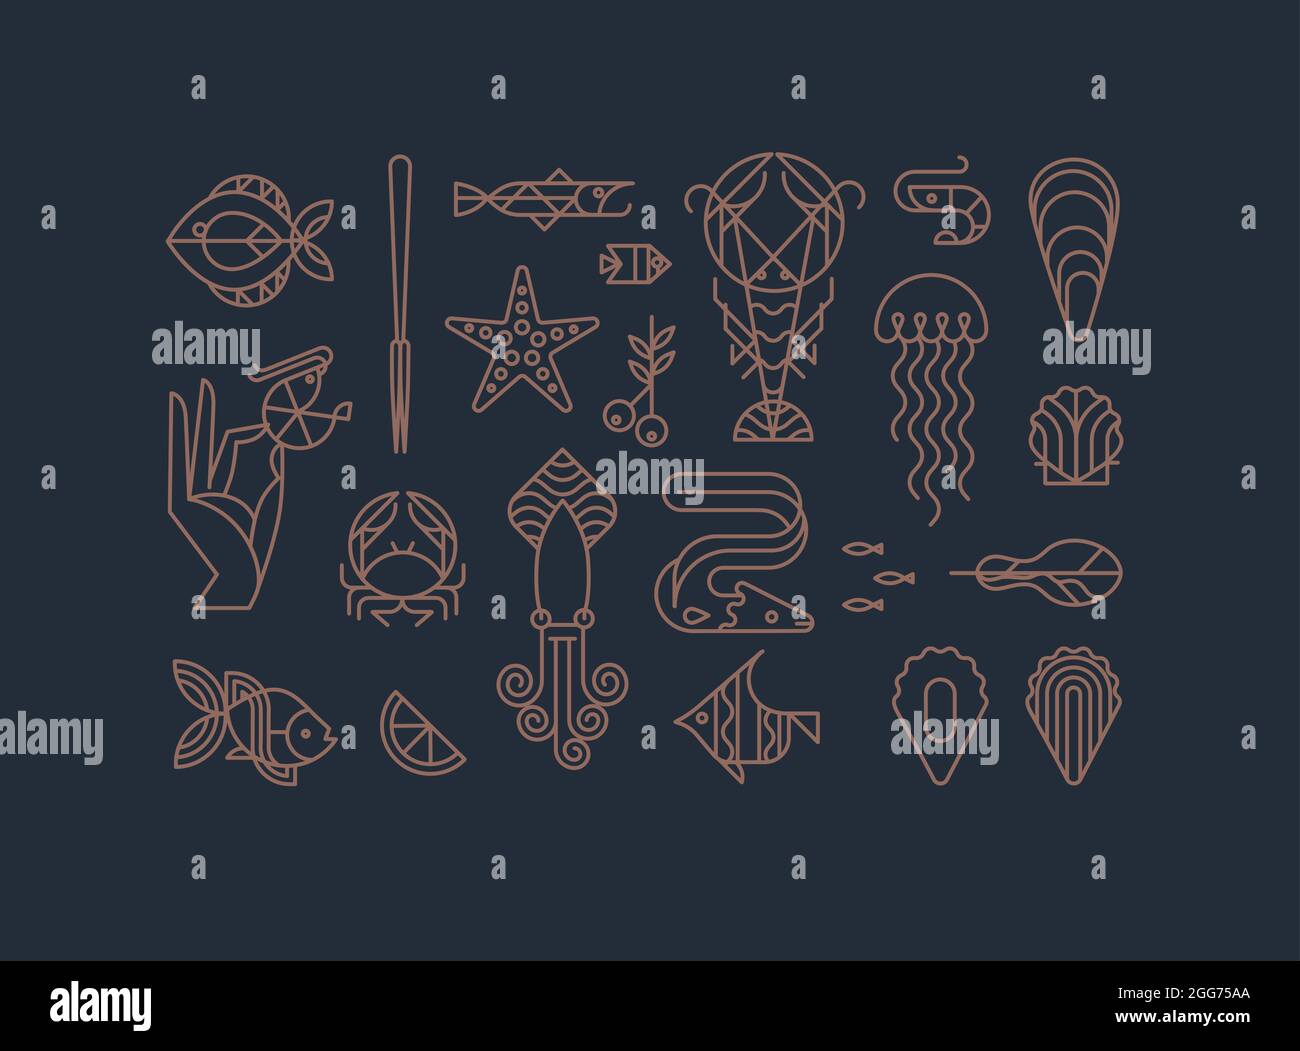 Set of creative modern art deco seafood signs in flat line style drawing on brown background. Stock Vector